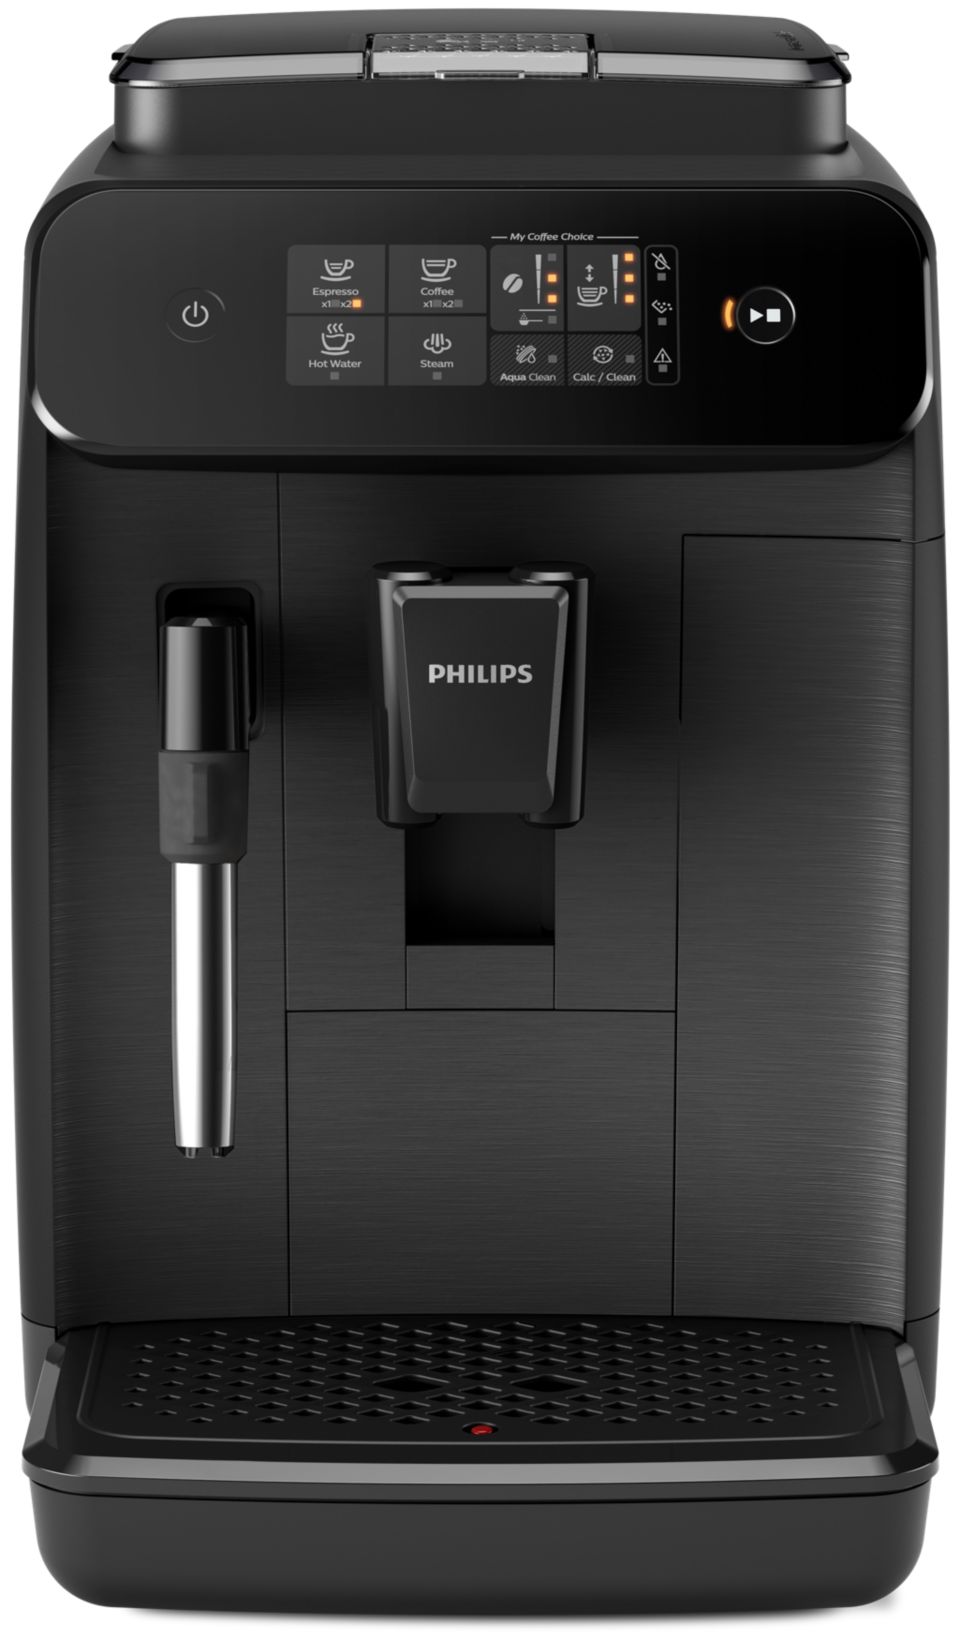 https://images.philips.com/is/image/philipsconsumer/e73eaca03f084bf7aa78aed600742ec6?$jpglarge$&wid=960